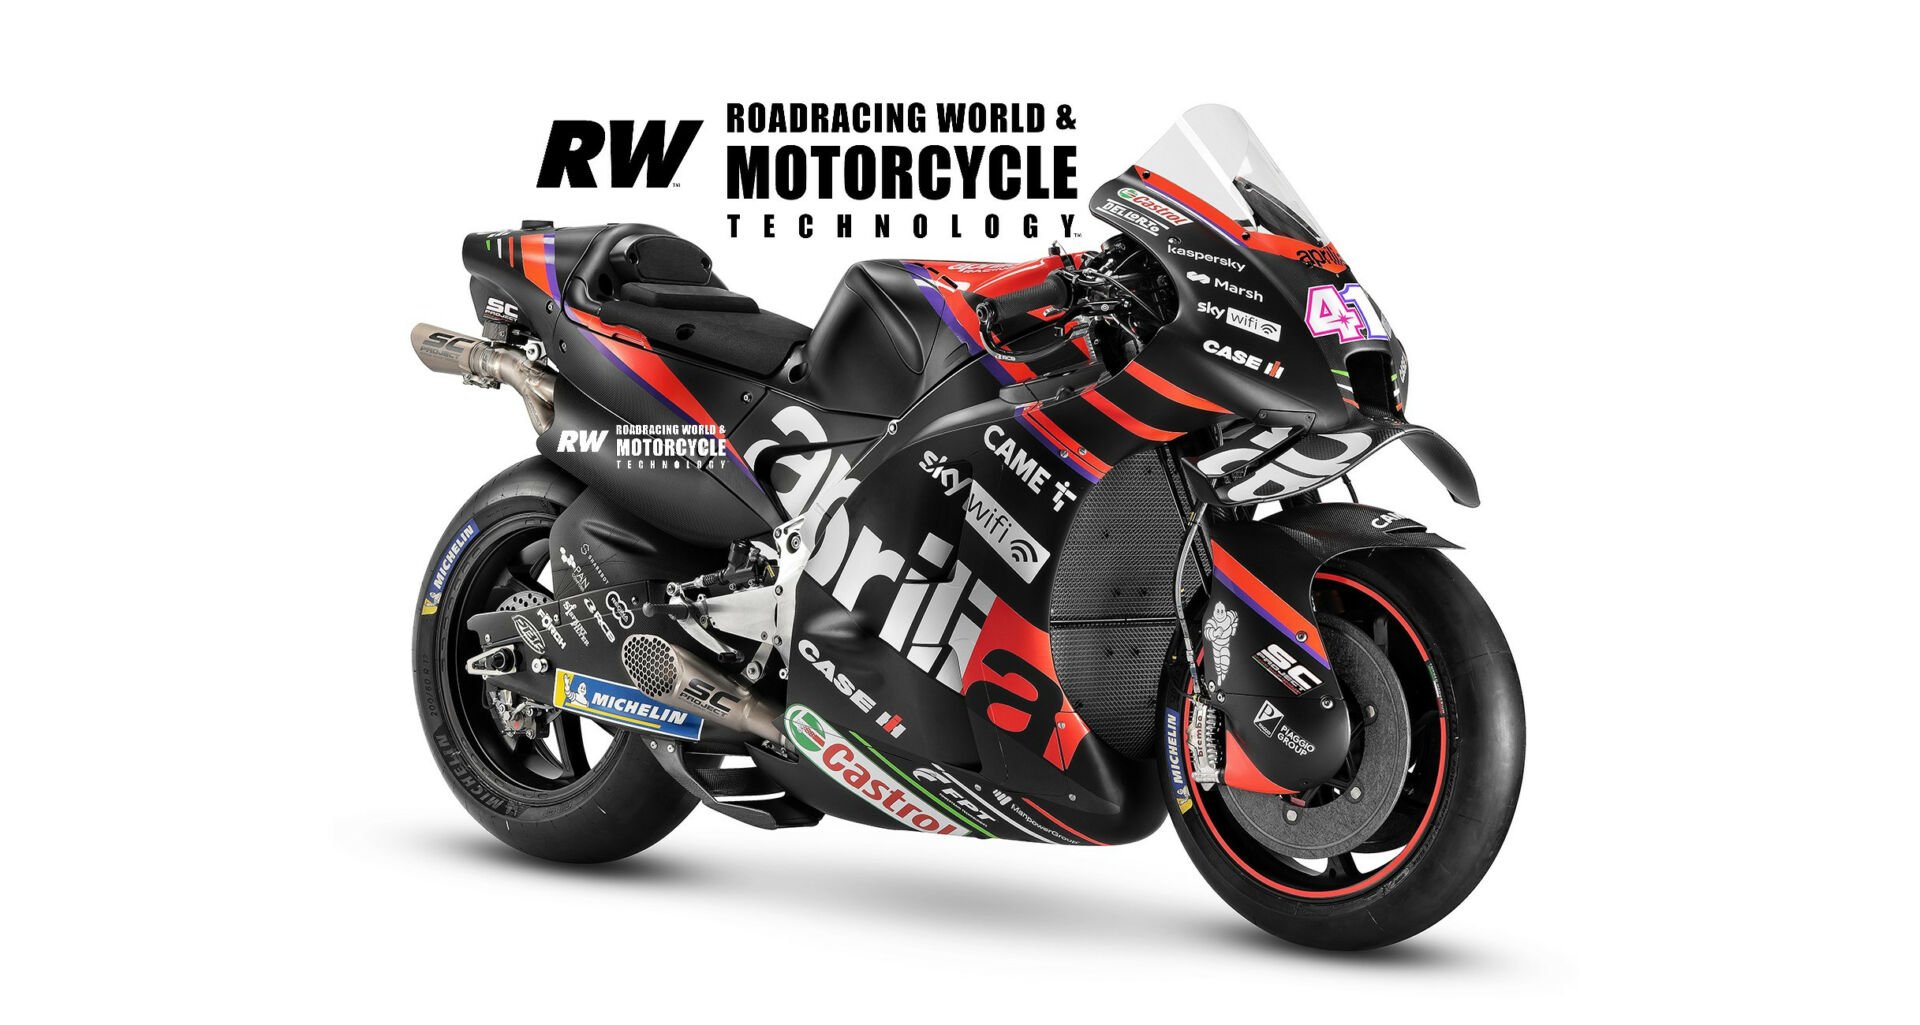 The 90-degree V4 Aprilia RS-GP as ridden by Aleix Espargaró (41), who took Aprilia's first MotoGP win. Note aerodynamics: Multi-element wings, fender extending over fork legs, air-gap between front wheel and fairing, and rear wheel airflow device and shielding. Photo courtesy Aprilia.